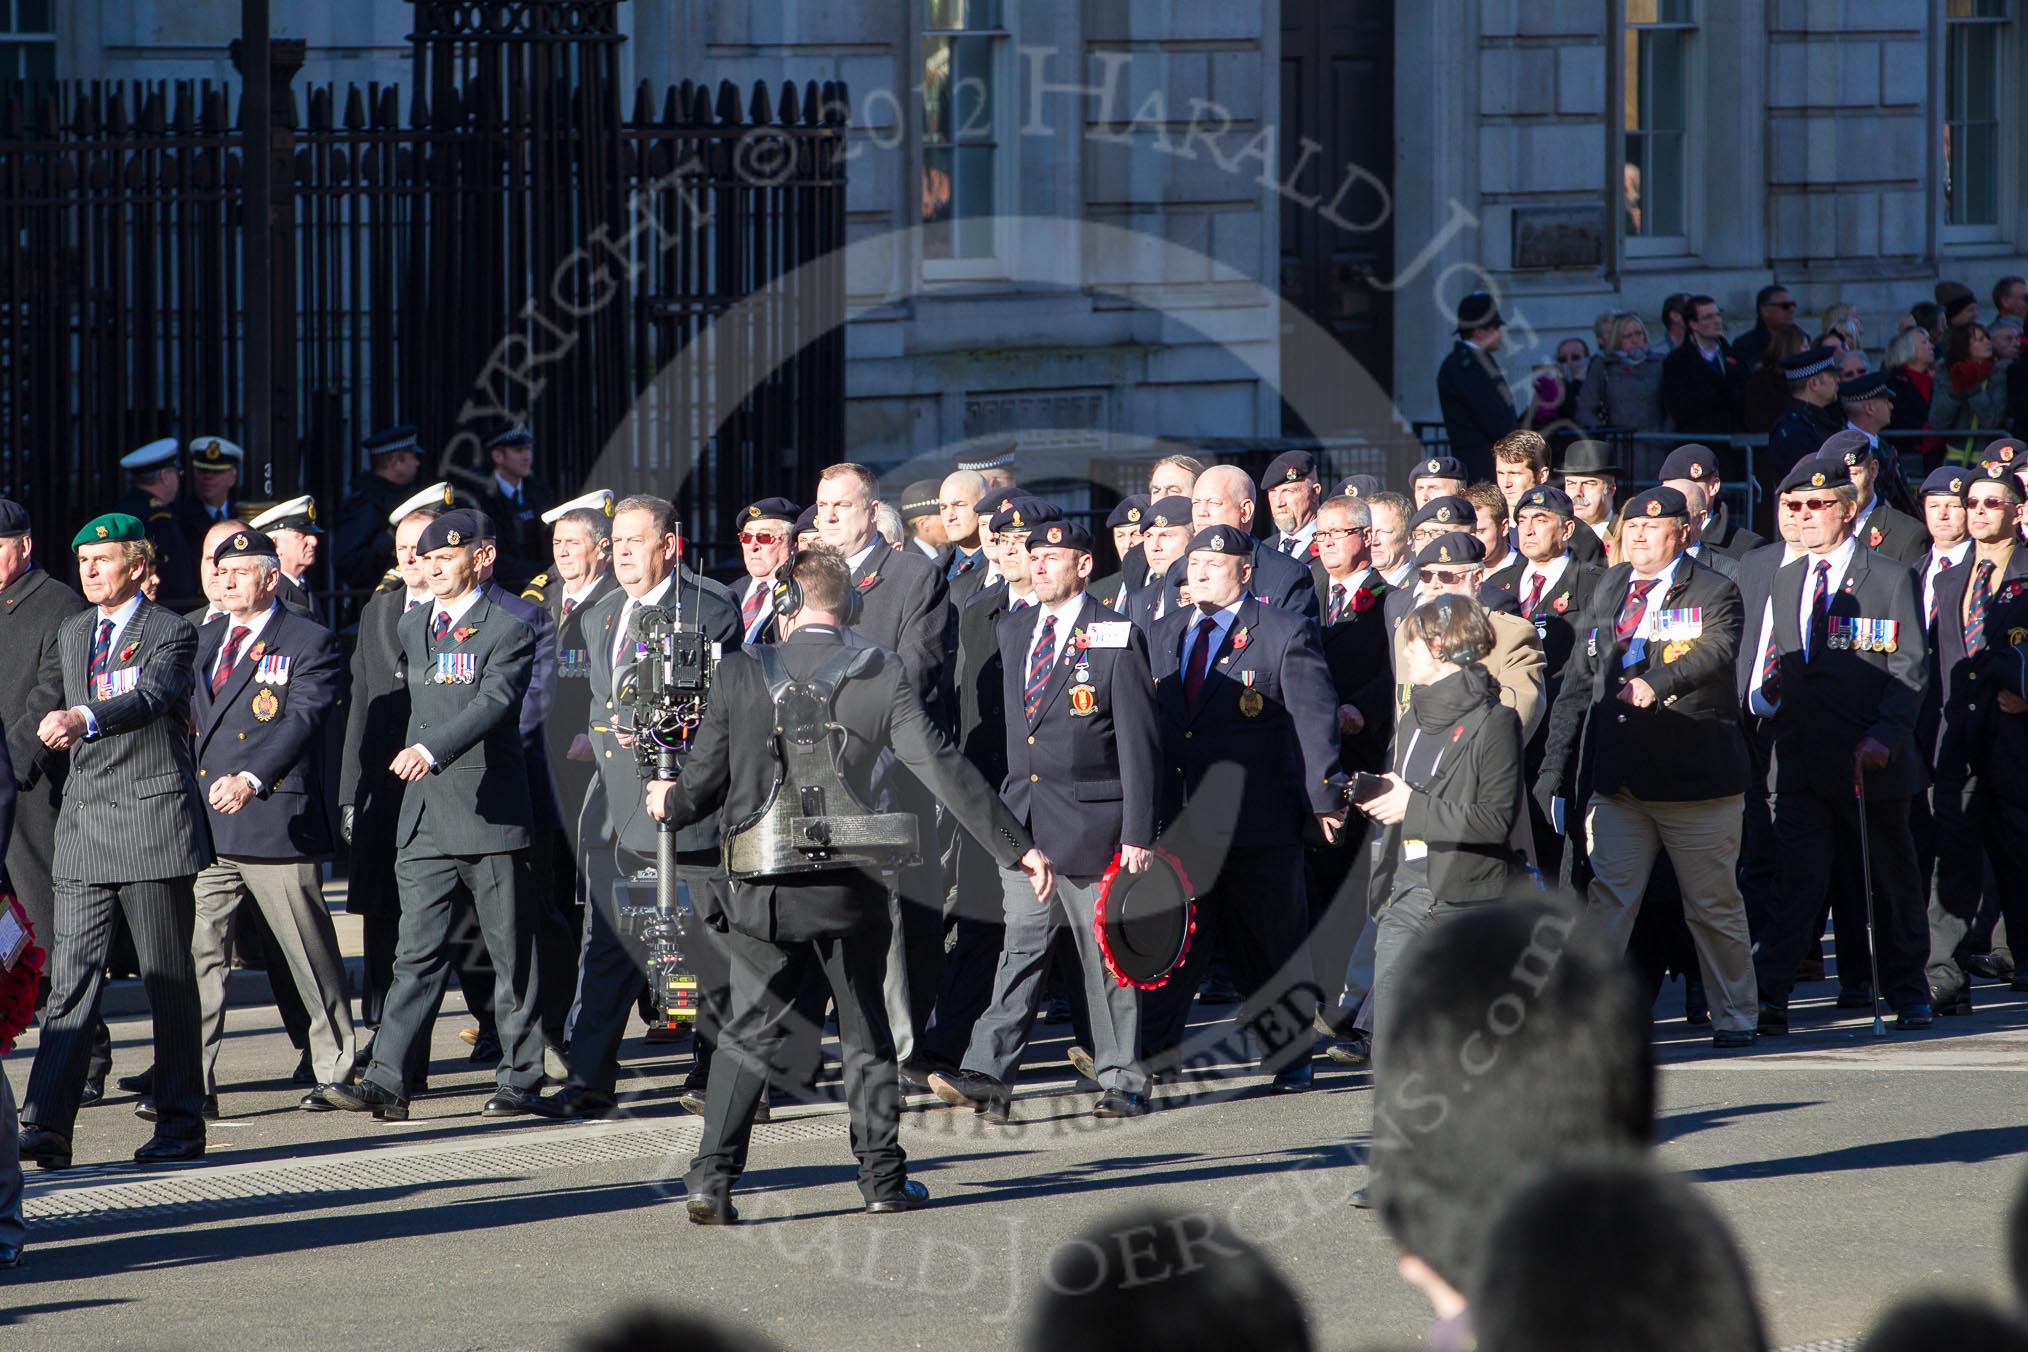 Remembrance Sunday 2012 Cenotaph March Past: Group B27 - Royal Engineers Bomb Disposal Association..
Whitehall, Cenotaph,
London SW1,

United Kingdom,
on 11 November 2012 at 11:58, image #980